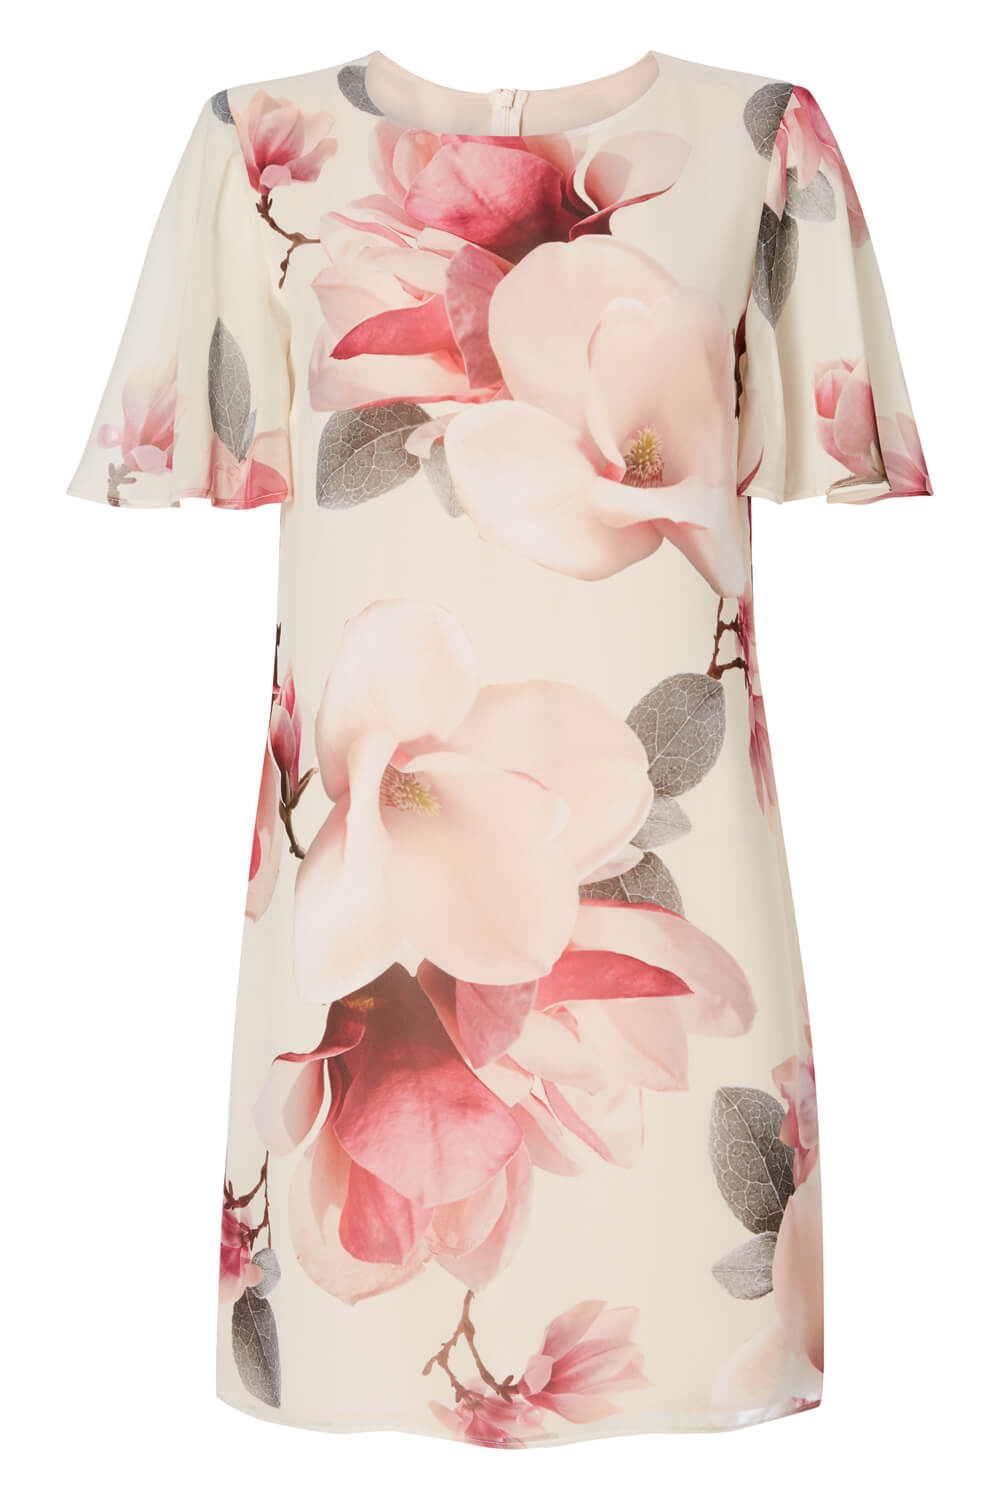 Light Pink All Over Floral Print Chiffon Dress, Image 5 of 5